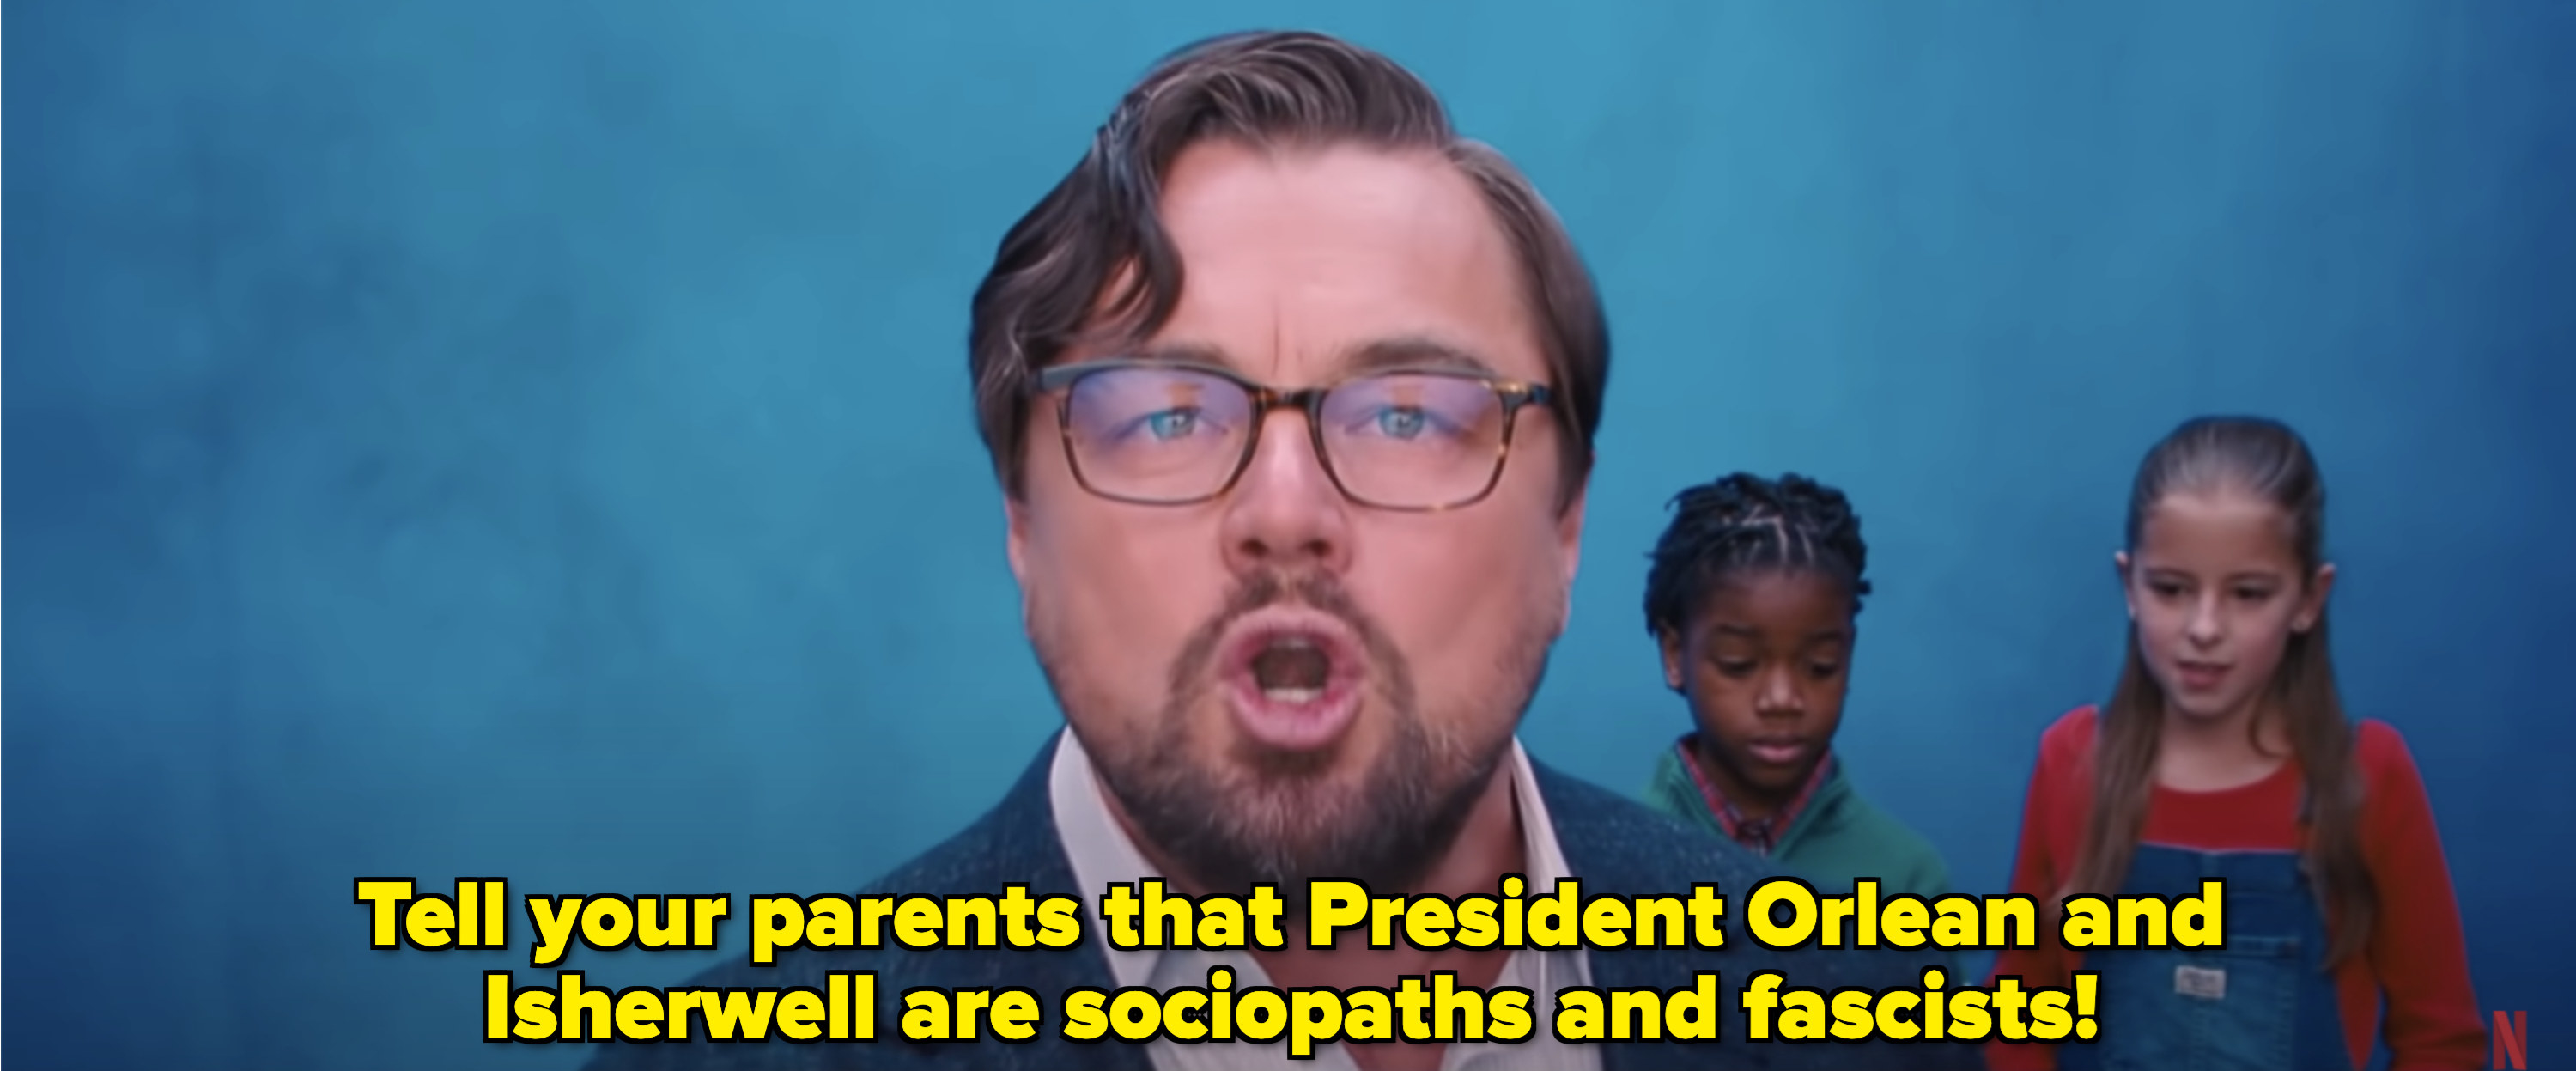 Leo telling the kids to tell their parents the president and Isherwell are sociopaths and fascists